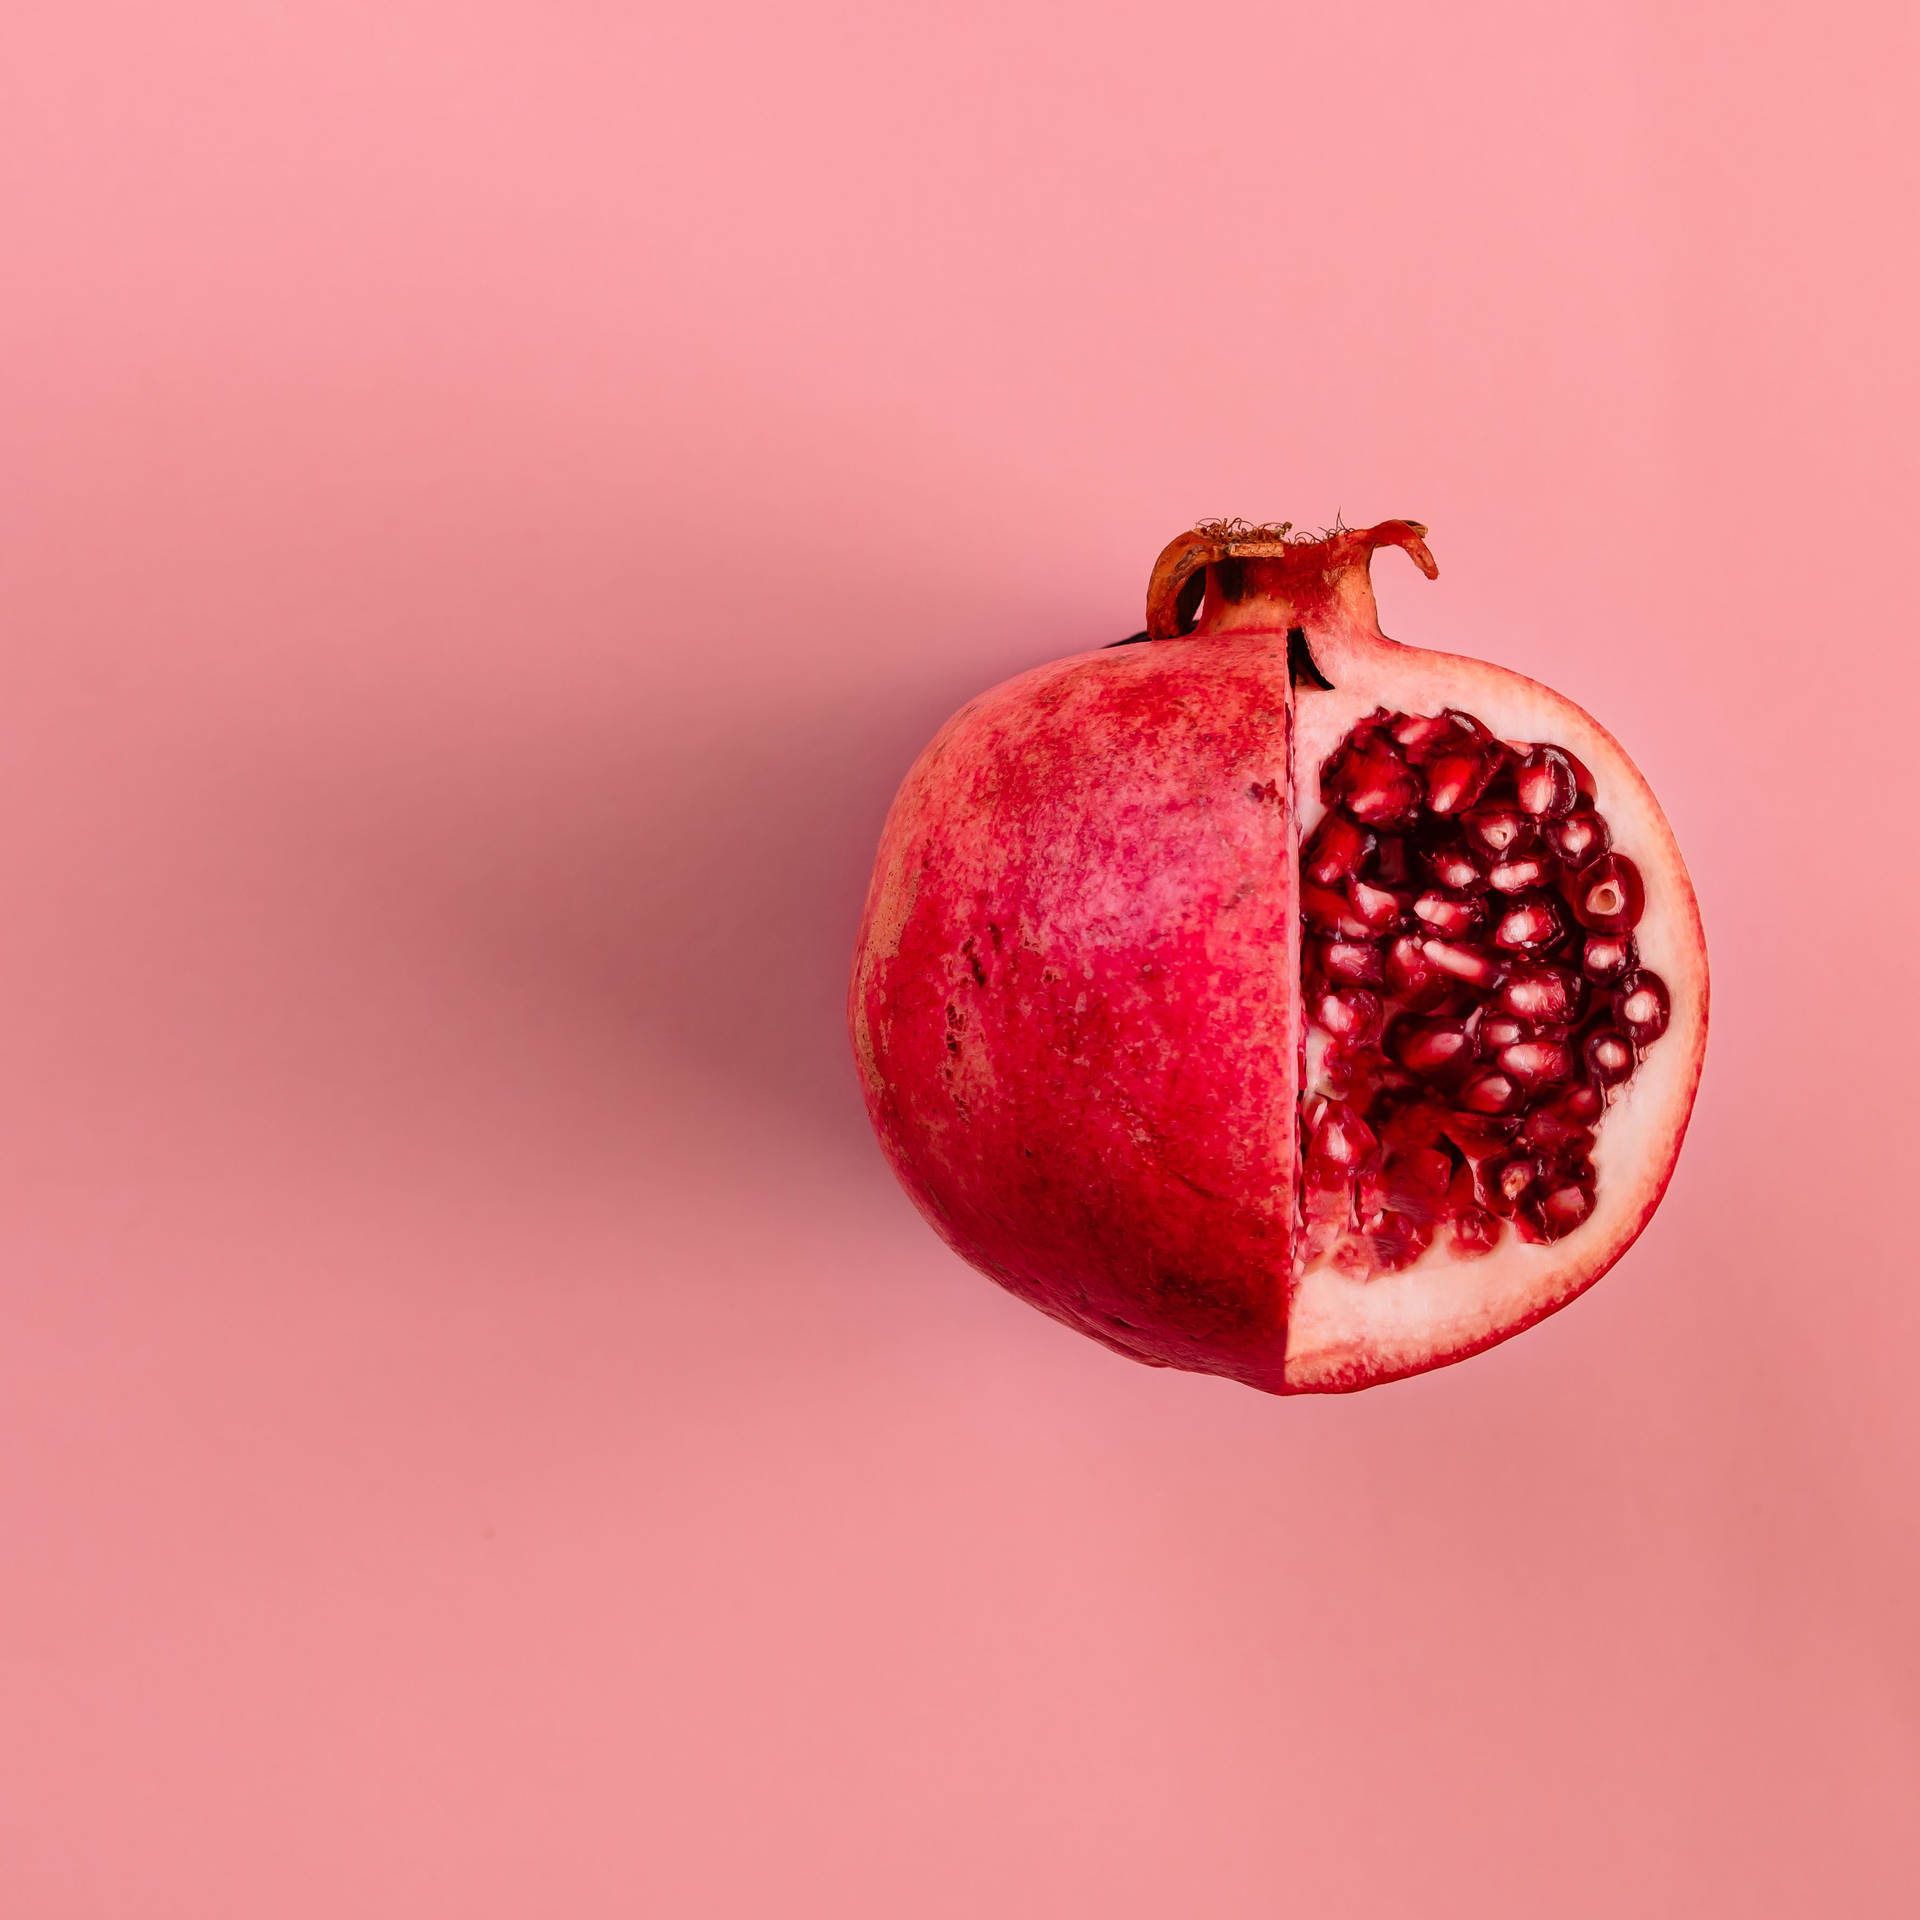 Pomegranate Pastel Red Aesthetic